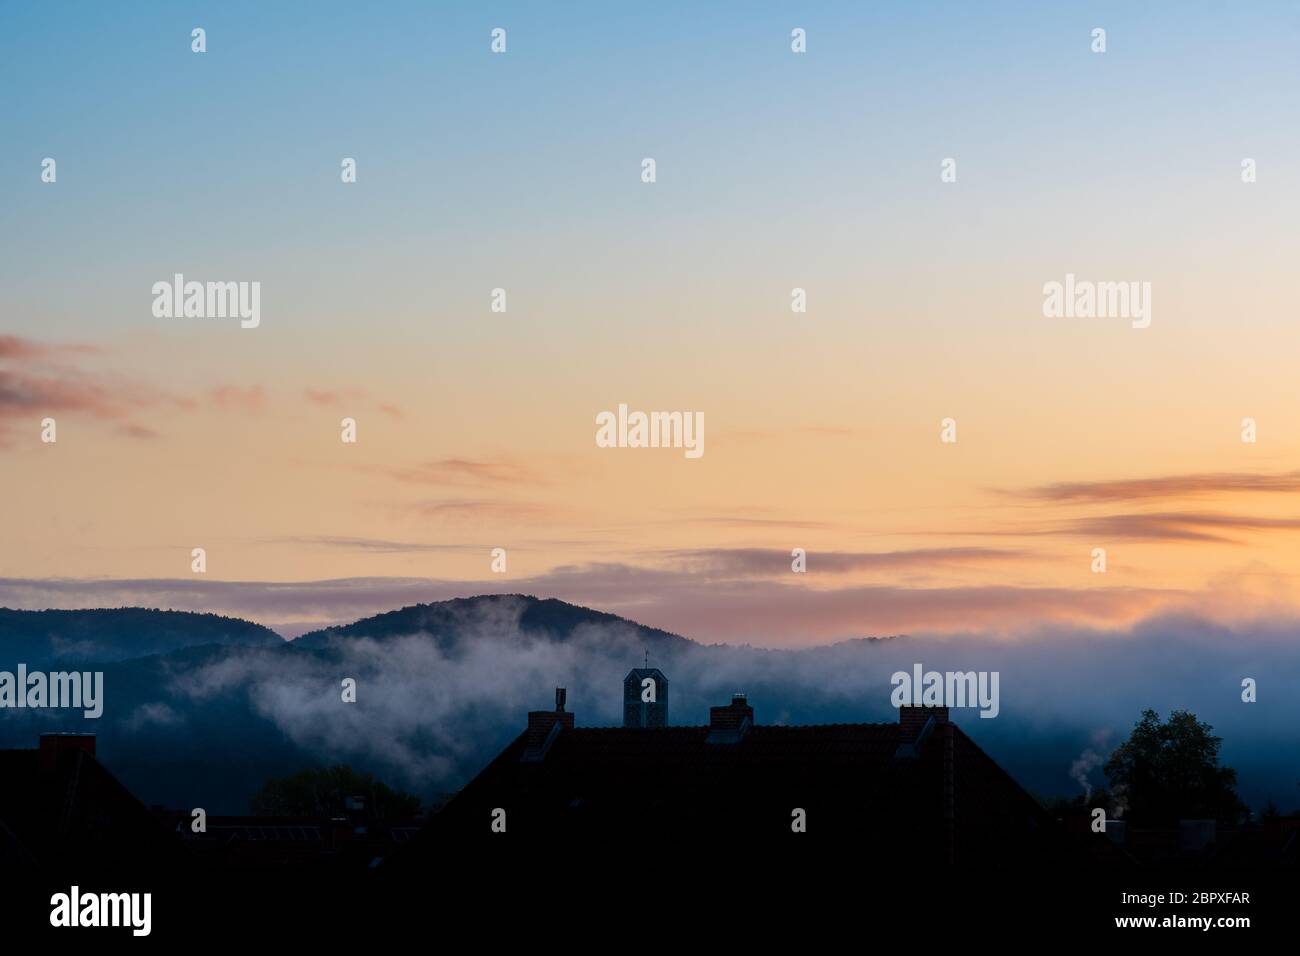 foggy trees and houses silhouette at dusk or dawn Stock Photo